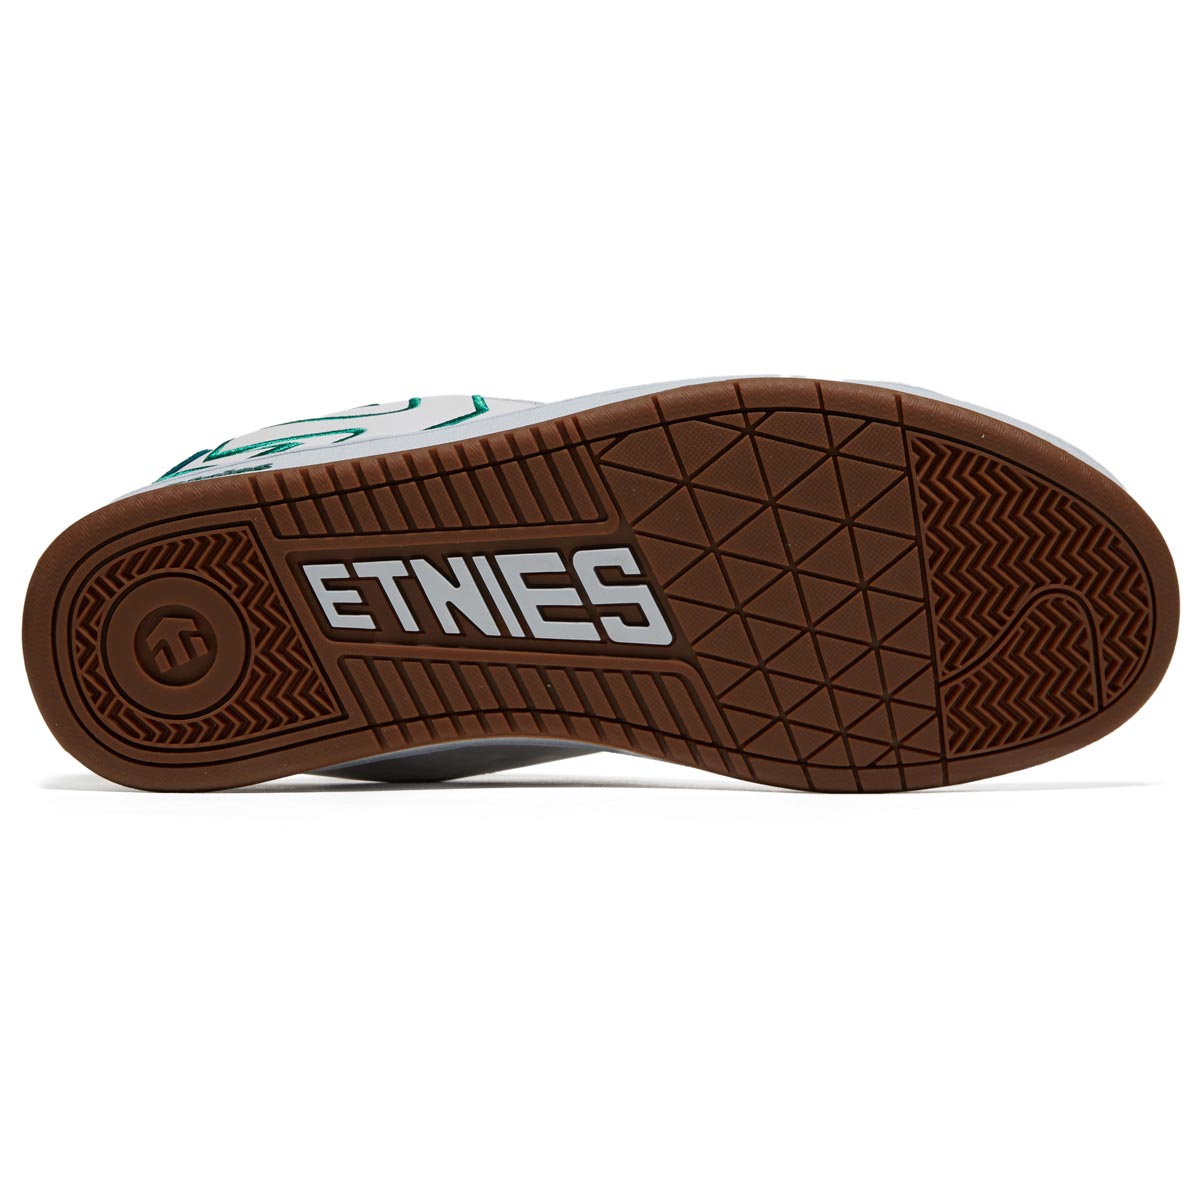 Etnies Fader Shoes - White/Green image 4